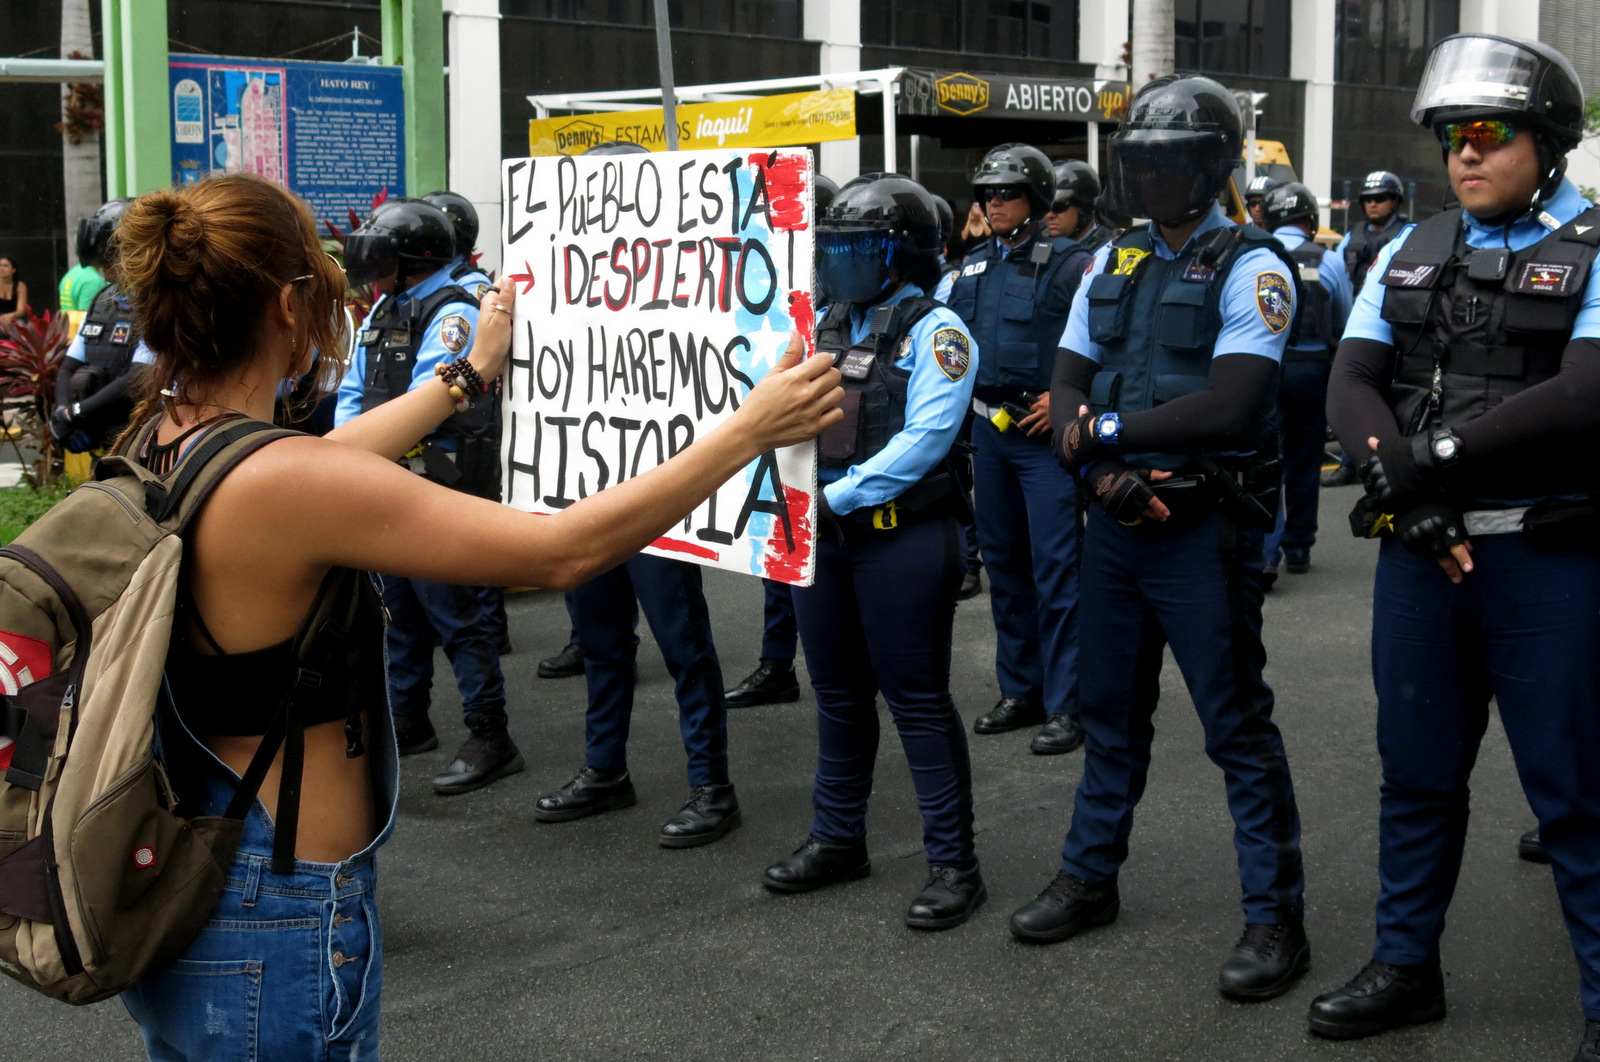 A woman holds a sign up to police that reads in Spanish "The people are awake. Today we'll make history" during a May Day protest against looming austerity measures amid an economic crisis and demanding an audit on the island's debt to identify those responsible in San Juan, Puerto Rico, May 1, 2017. Puerto Rico is preparing to cut public employee benefits, increase tax revenue, hike water rates and privatize government operations, among other things. (AP/Danica Coto)